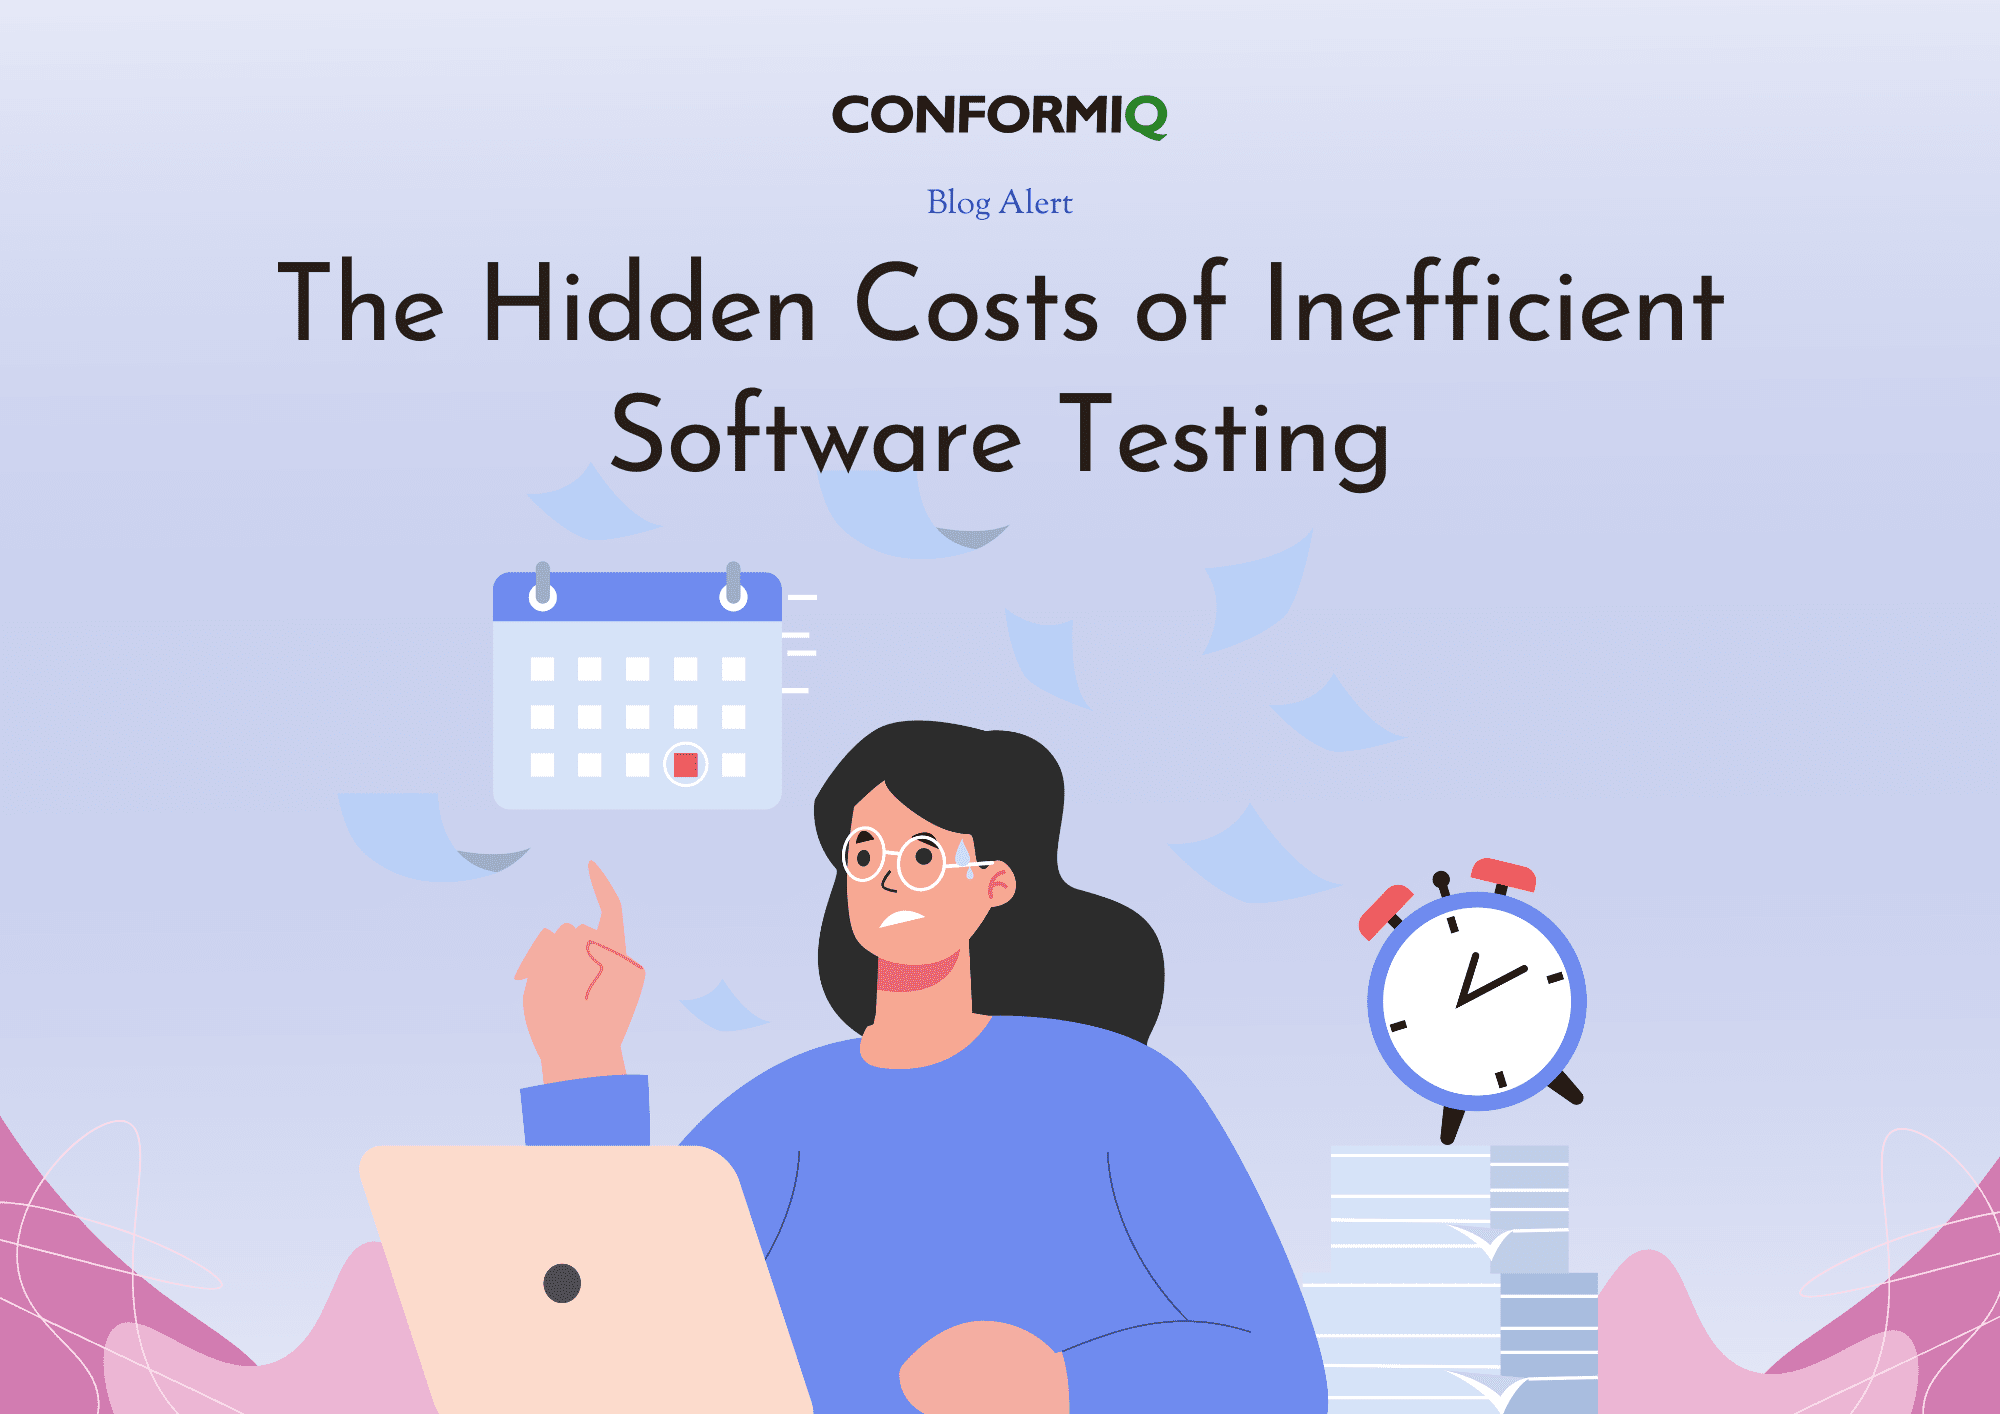 Blog on The Hidden Costs of Inefficient Software Testing